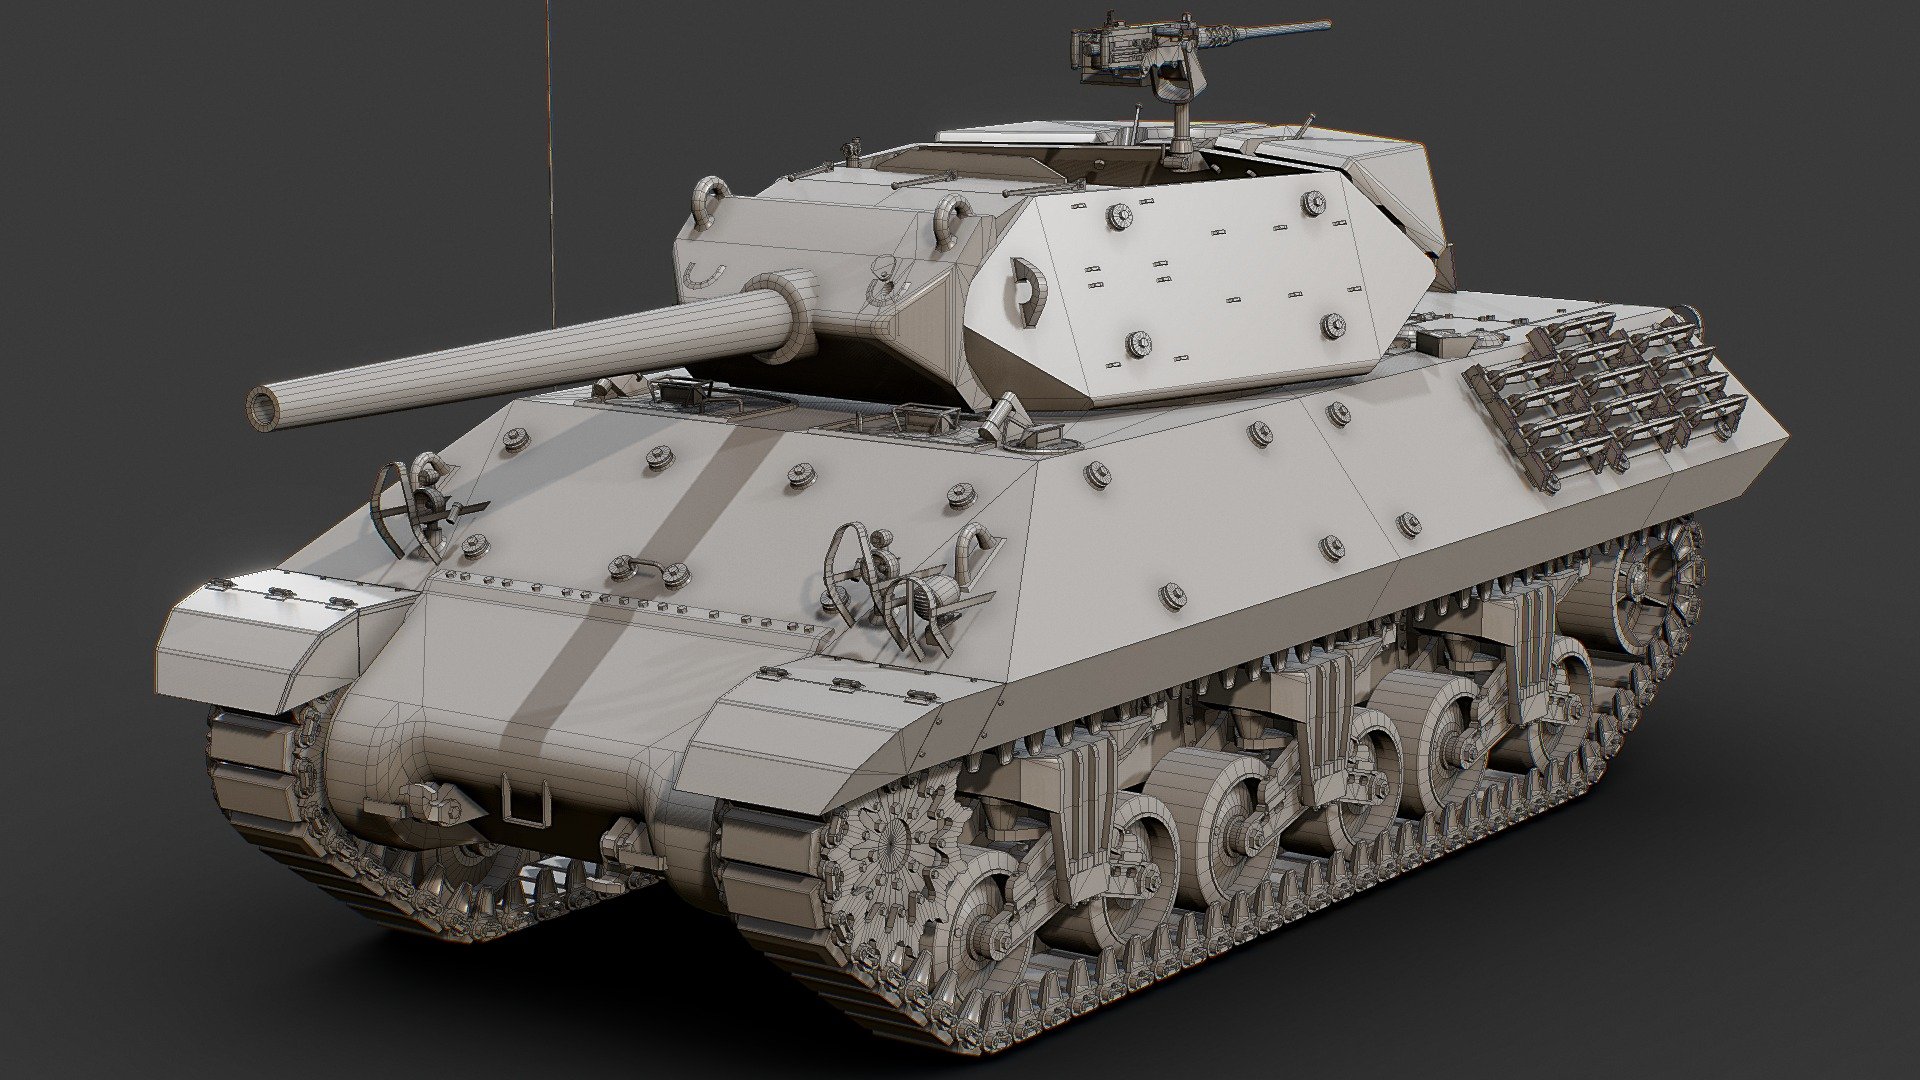 You are free to use and modify this model in any commercial project without any limitations, except for the reselling of the model itself.




File Format : FBX, Blend

Total Tris with tracks : 266827

Total Tris without tracks : 150403

UVs and texture maps are not included

This model is not intended for 3D printing

This model is not rigged, it only has a basic hierarchy and pivot points
 - M10 GMC - Base Mesh - Buy Royalty Free 3D model by ArmorWorks3D 3d model